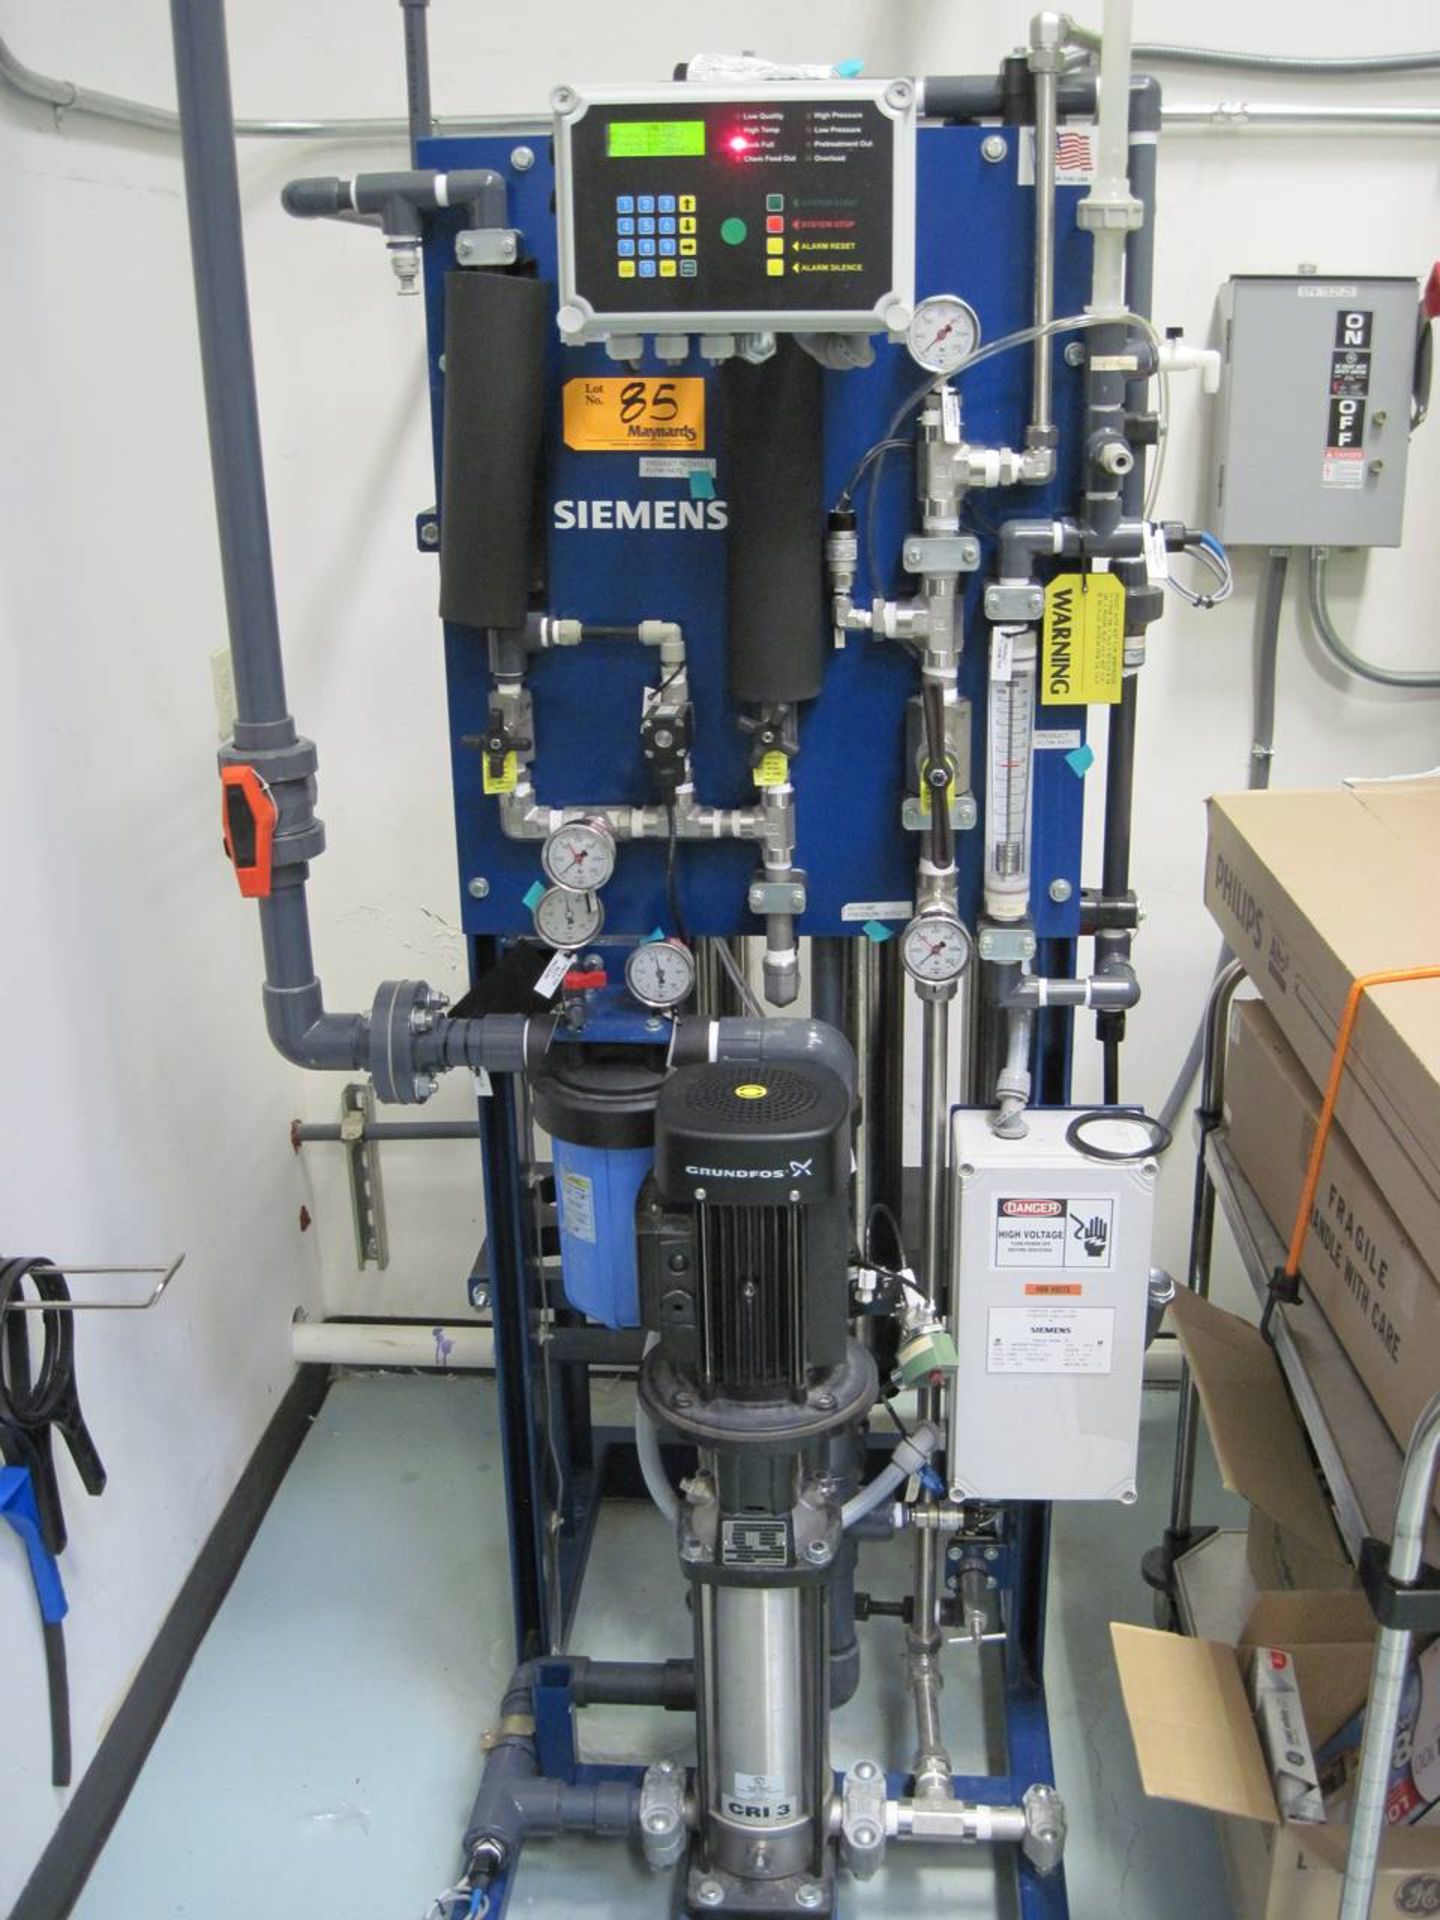 Siemens Clean Water System, 35 GPM, Stainless Steel - Image 4 of 4